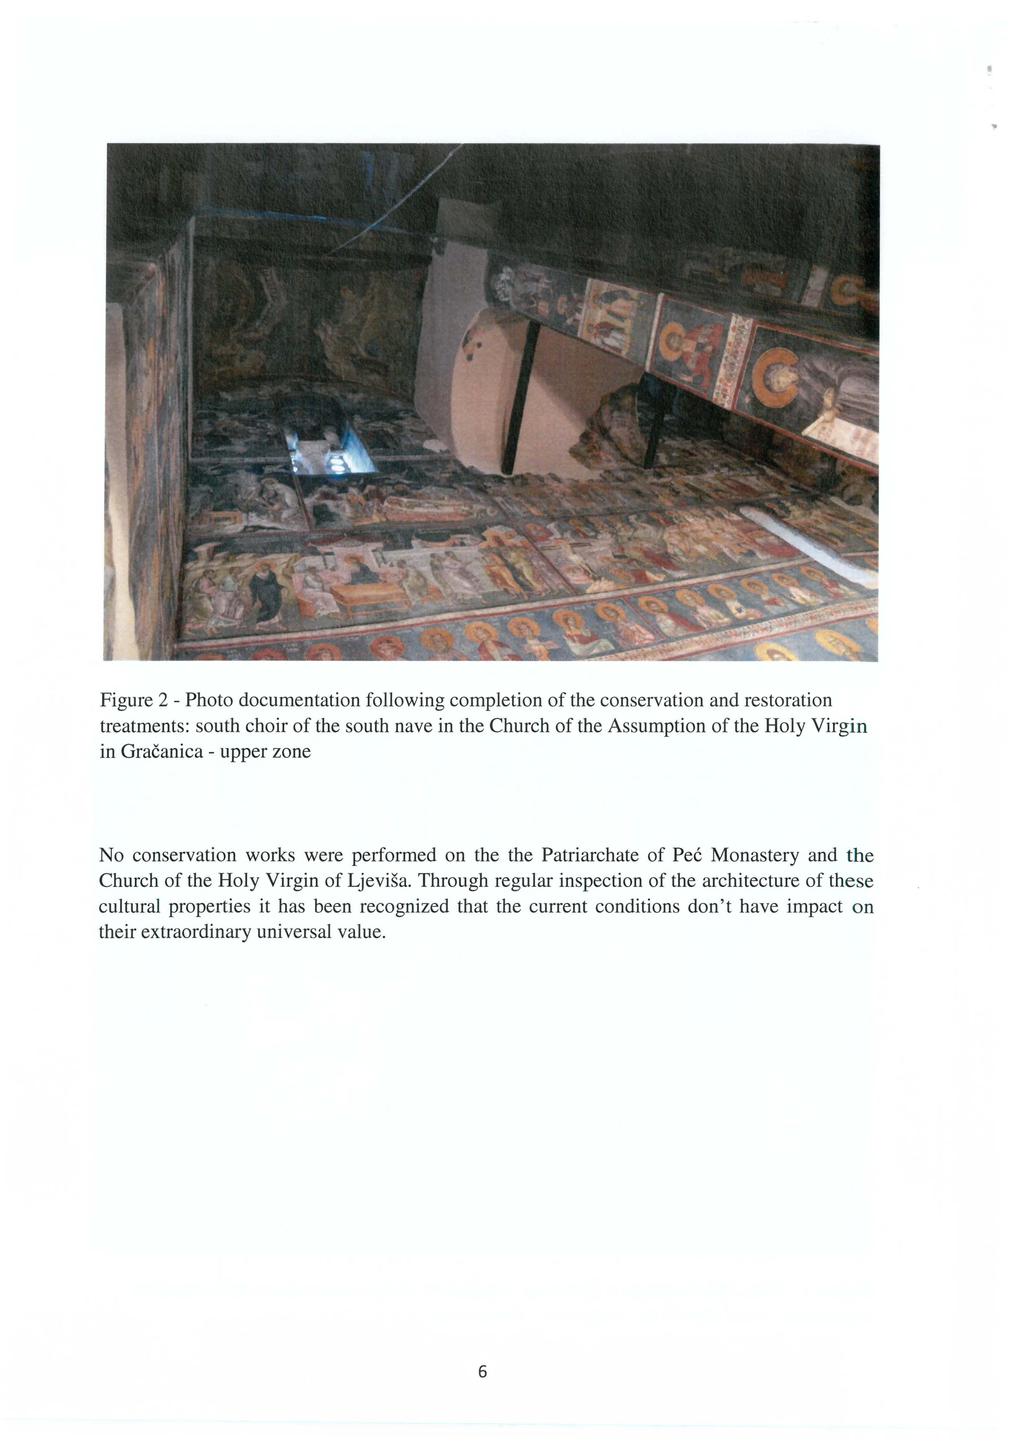 Figure 2 - Photo documentation following completion of the conservation and restoration treatments: south choir of the south nave in the Church of the Assumption of the Holy Virgin in Gracanica-